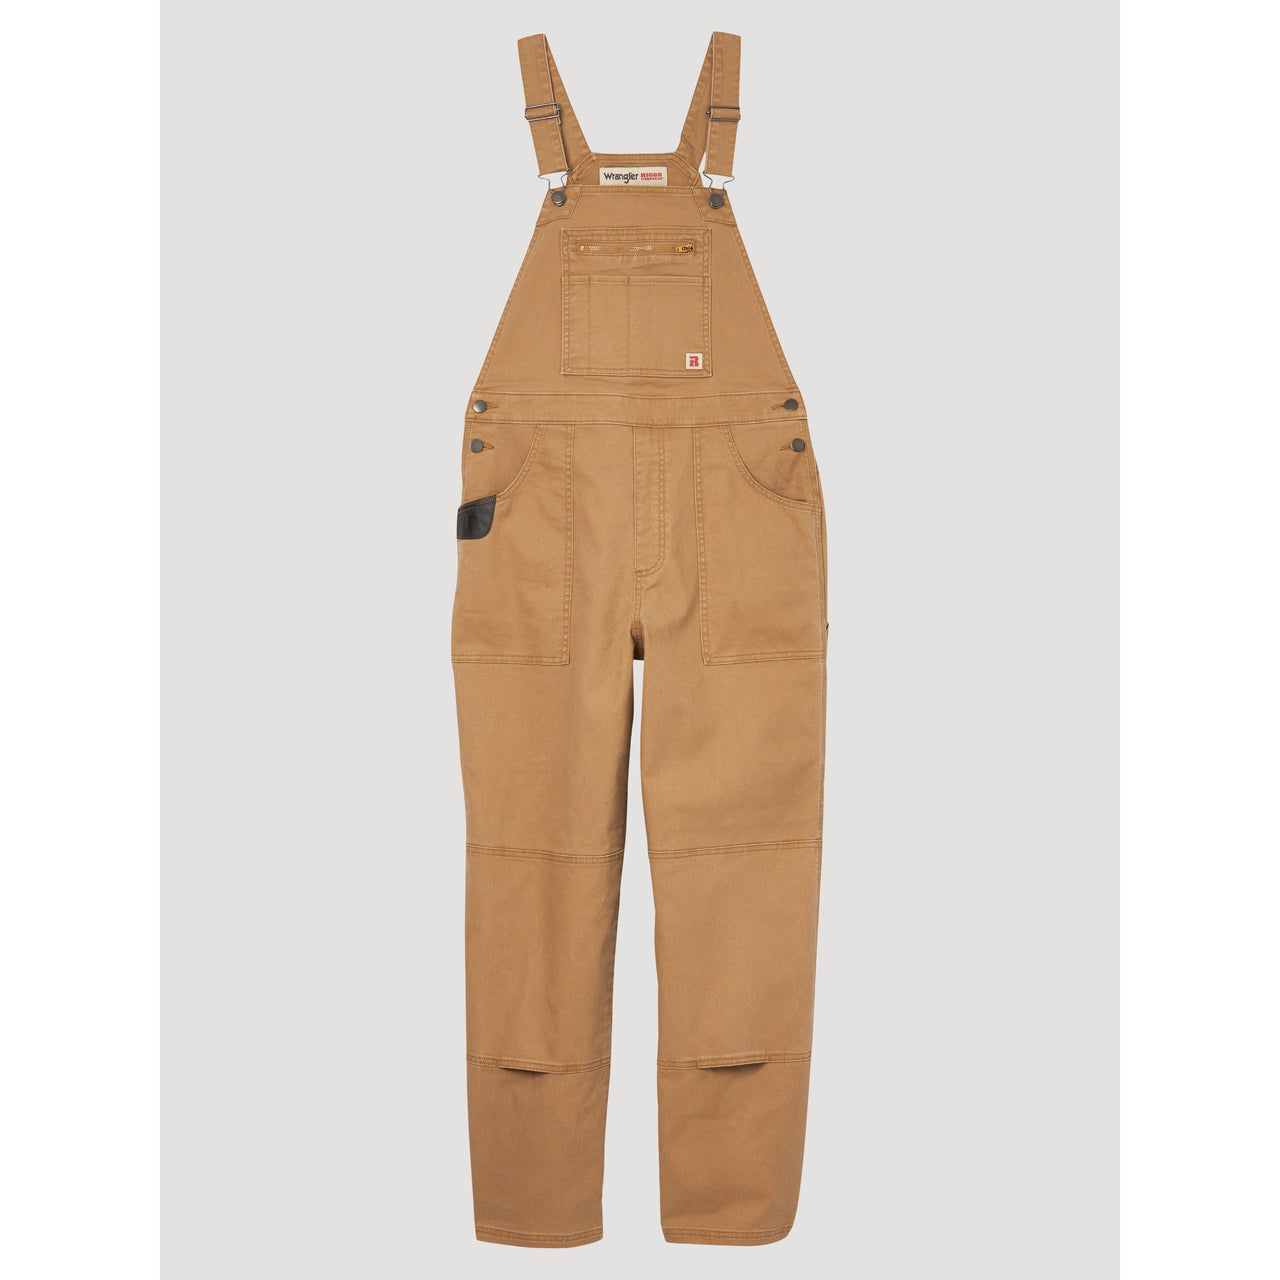 Wrangler® Riggs Workwear® For Women Work Overall - Relaxed Fit